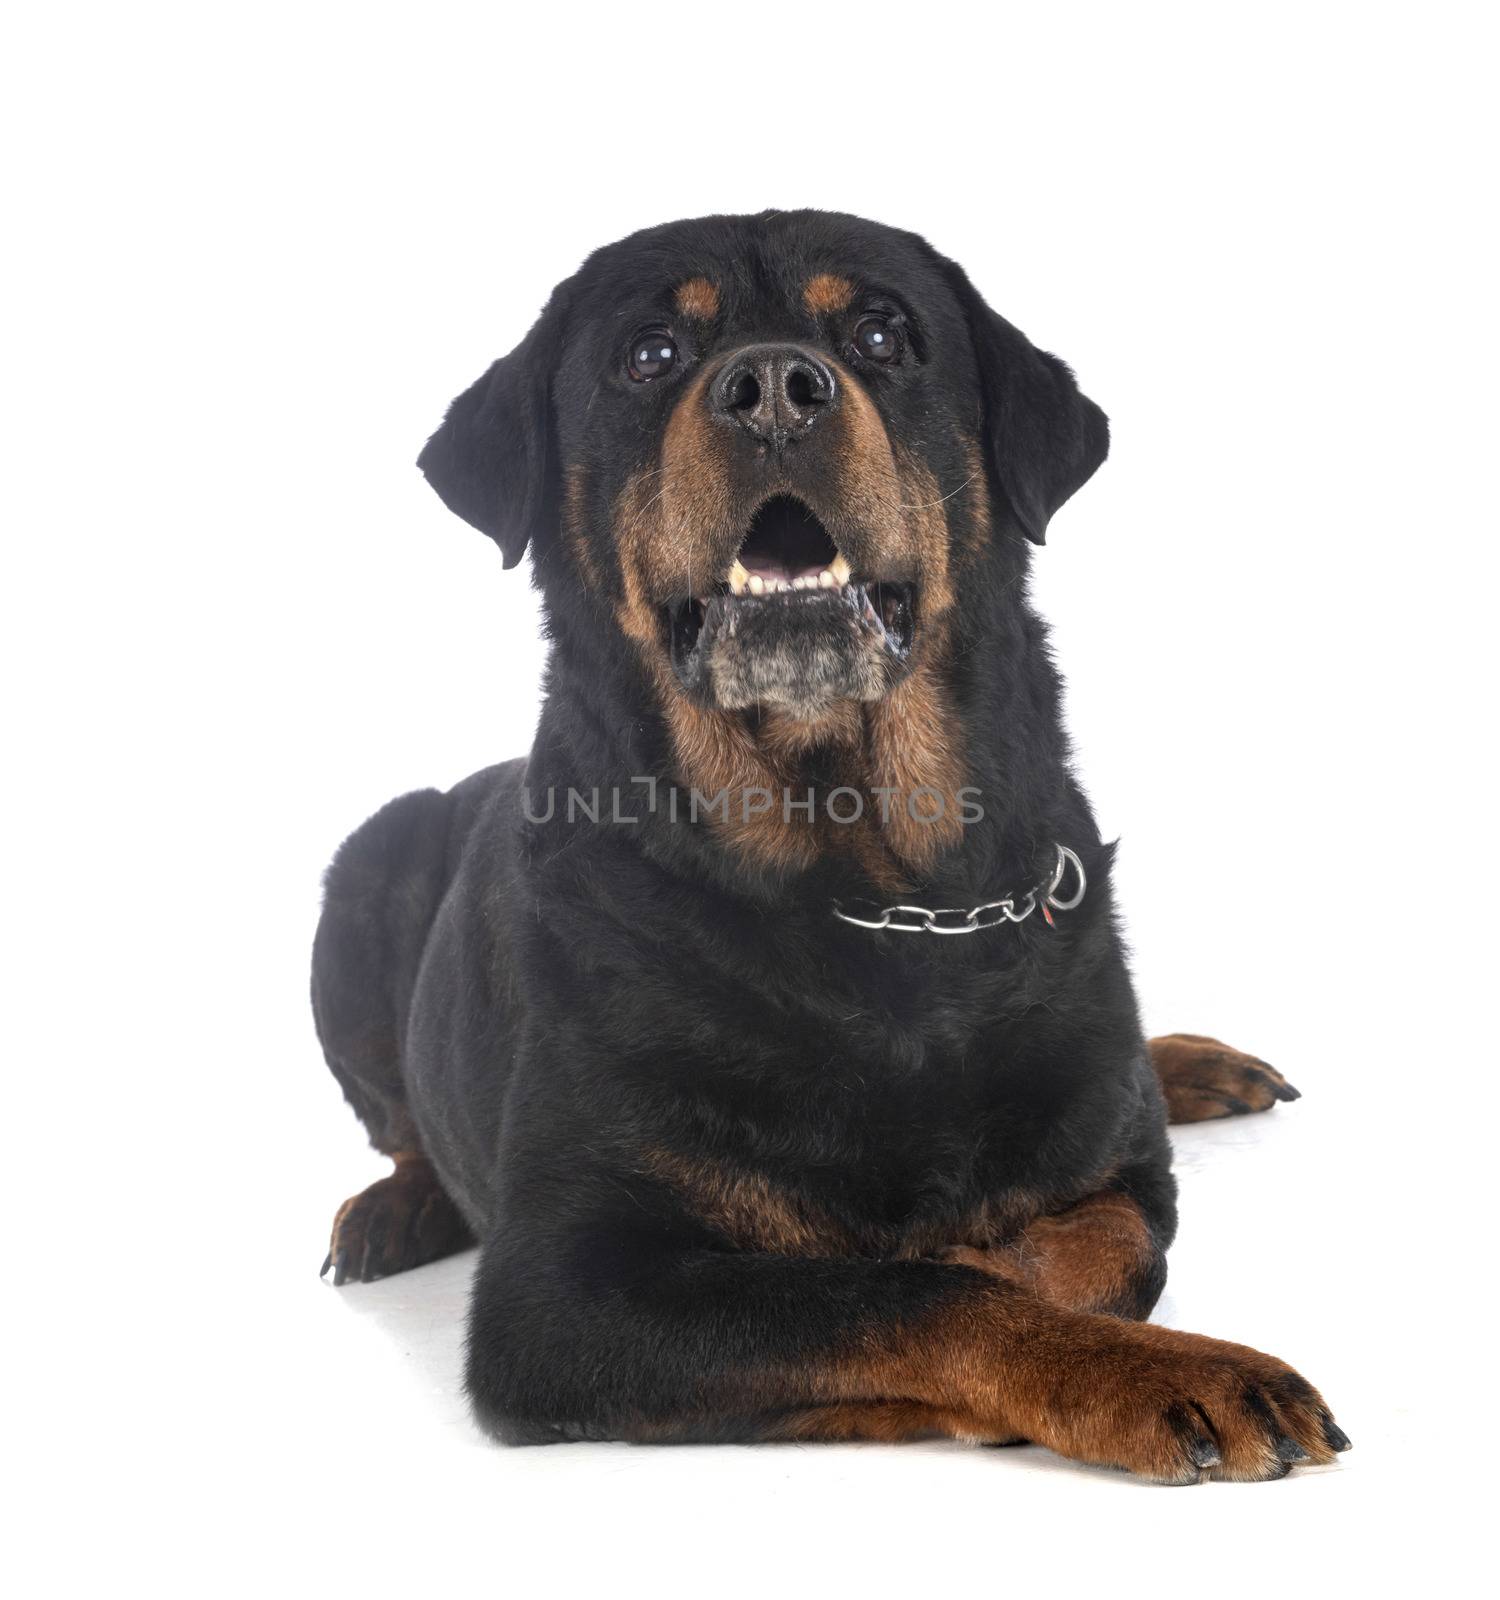 purebred rottweiler in front of white background